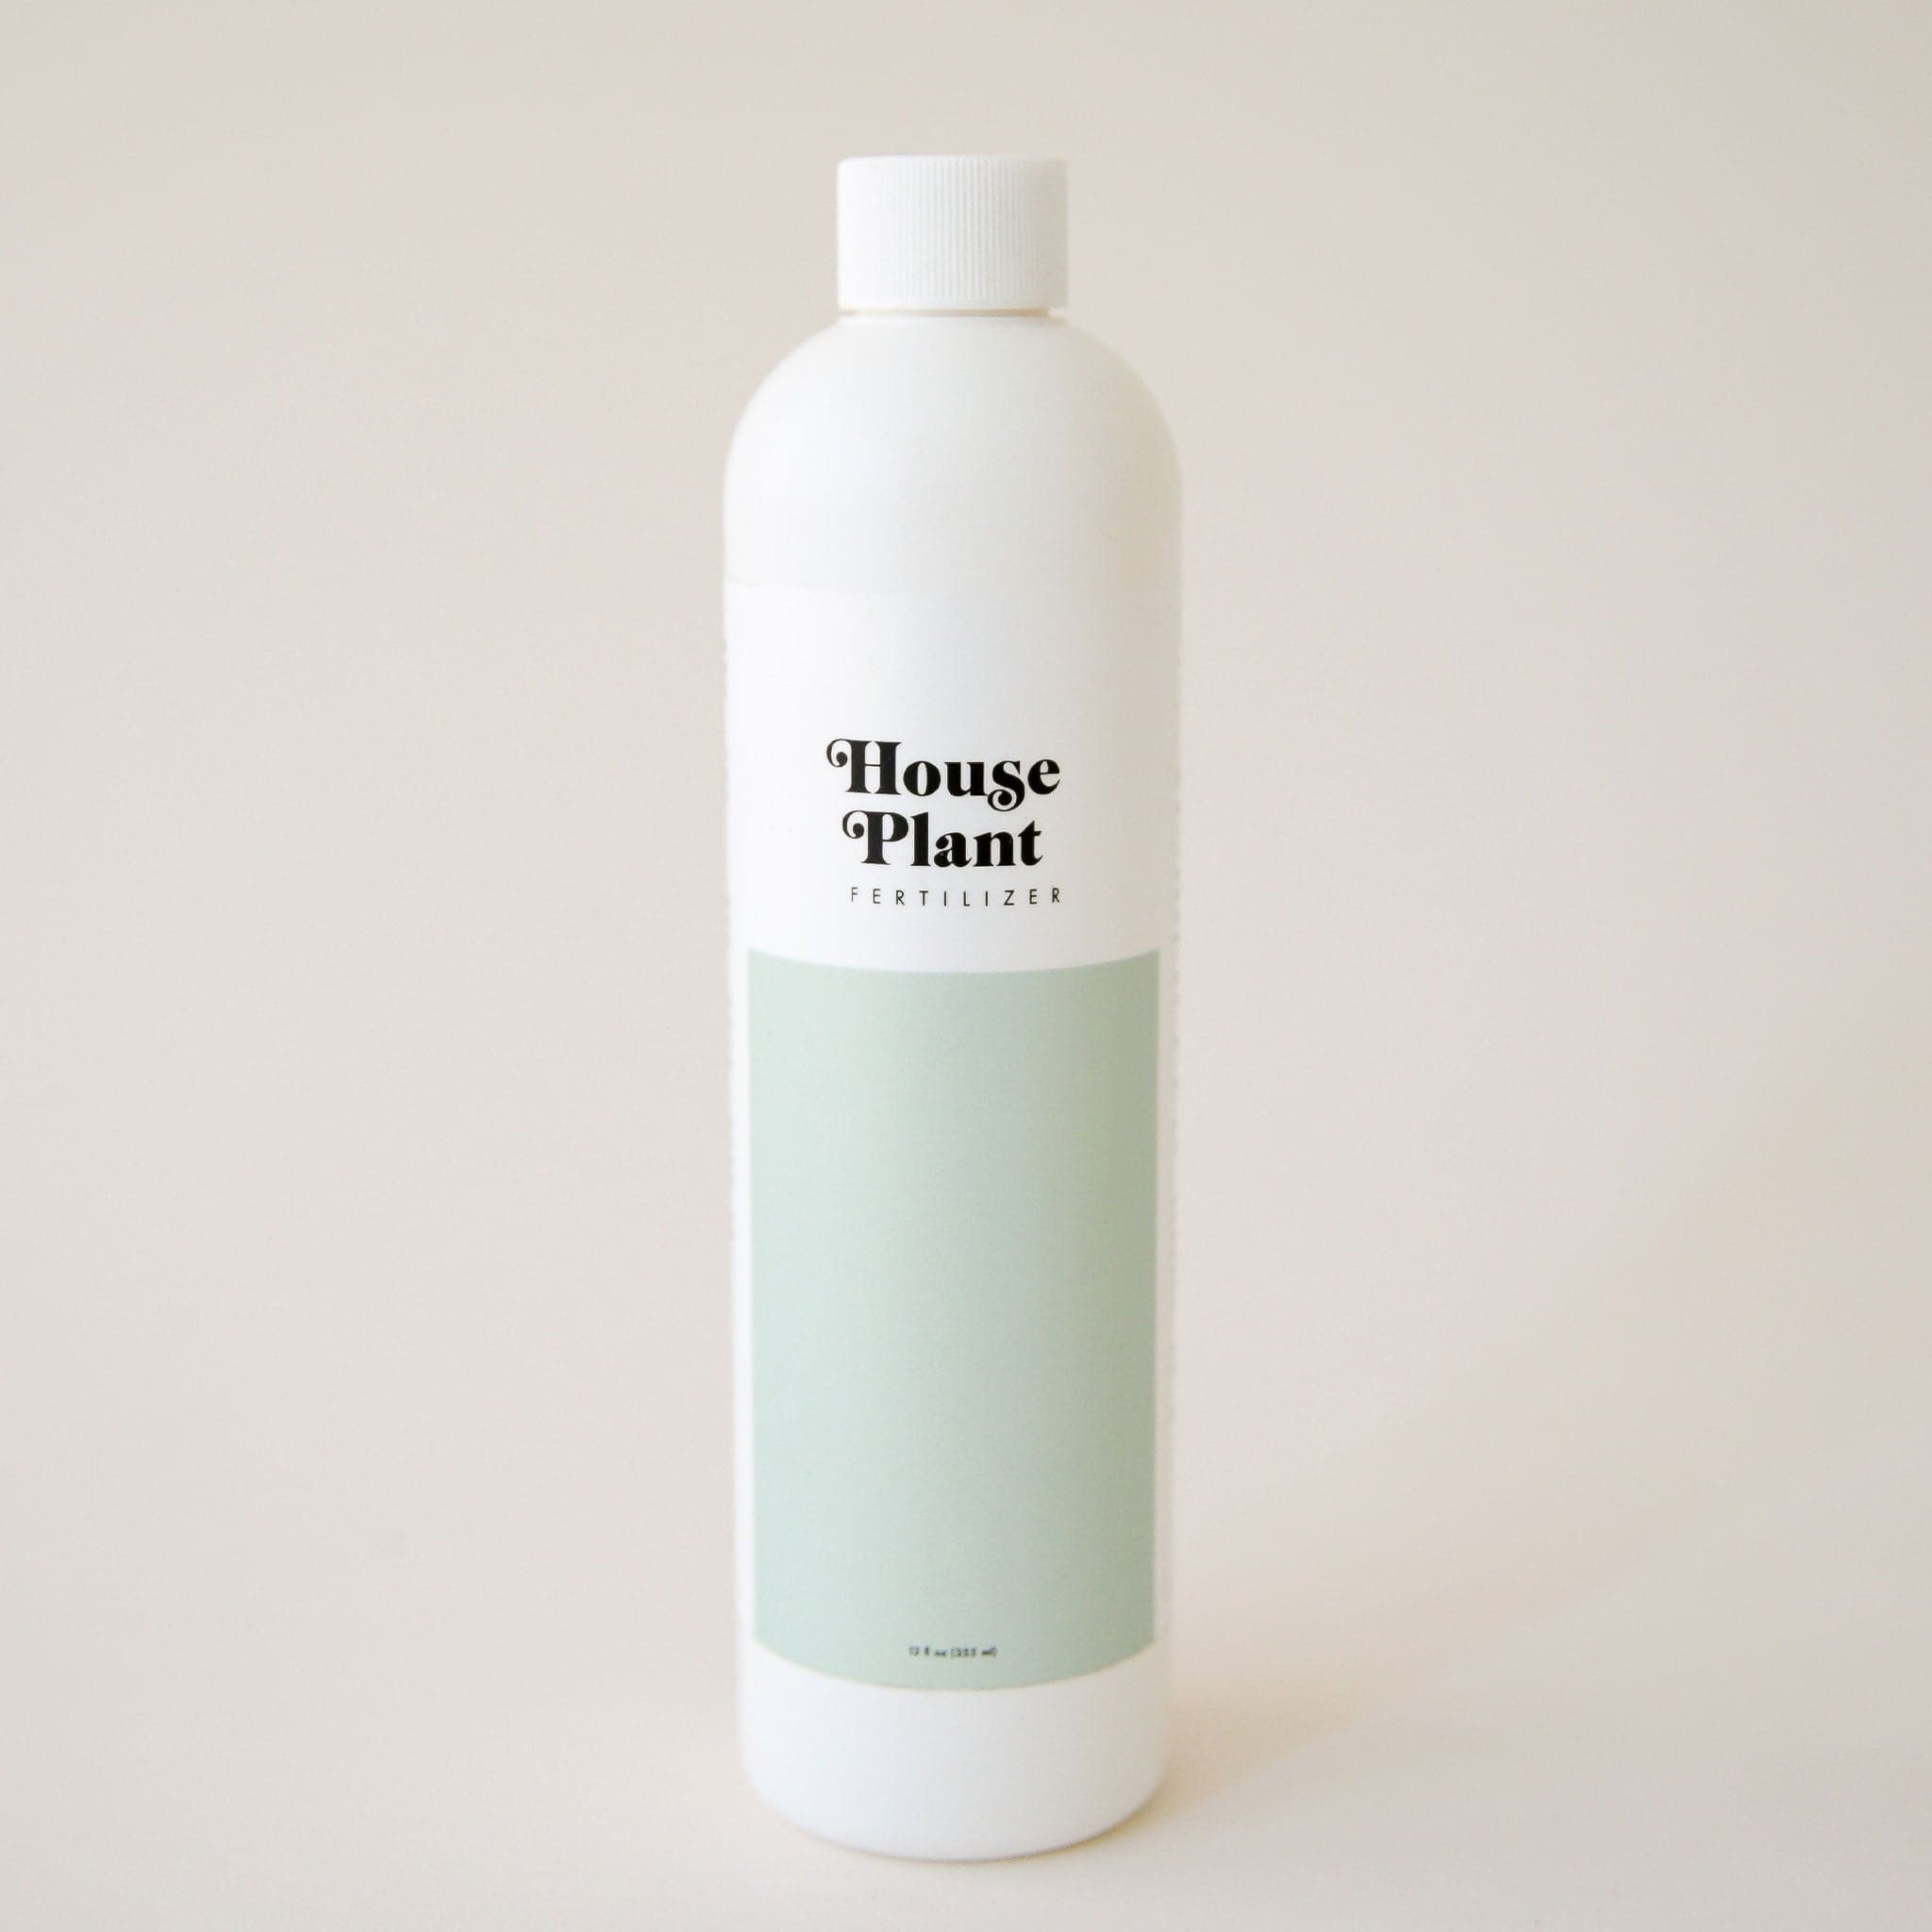 On a cream background is a white plastic bottle of fertilizer with a light teal rectangular shape on the bottom half and text on the top that reads, "House Plant Fertilizer" in black letters. 